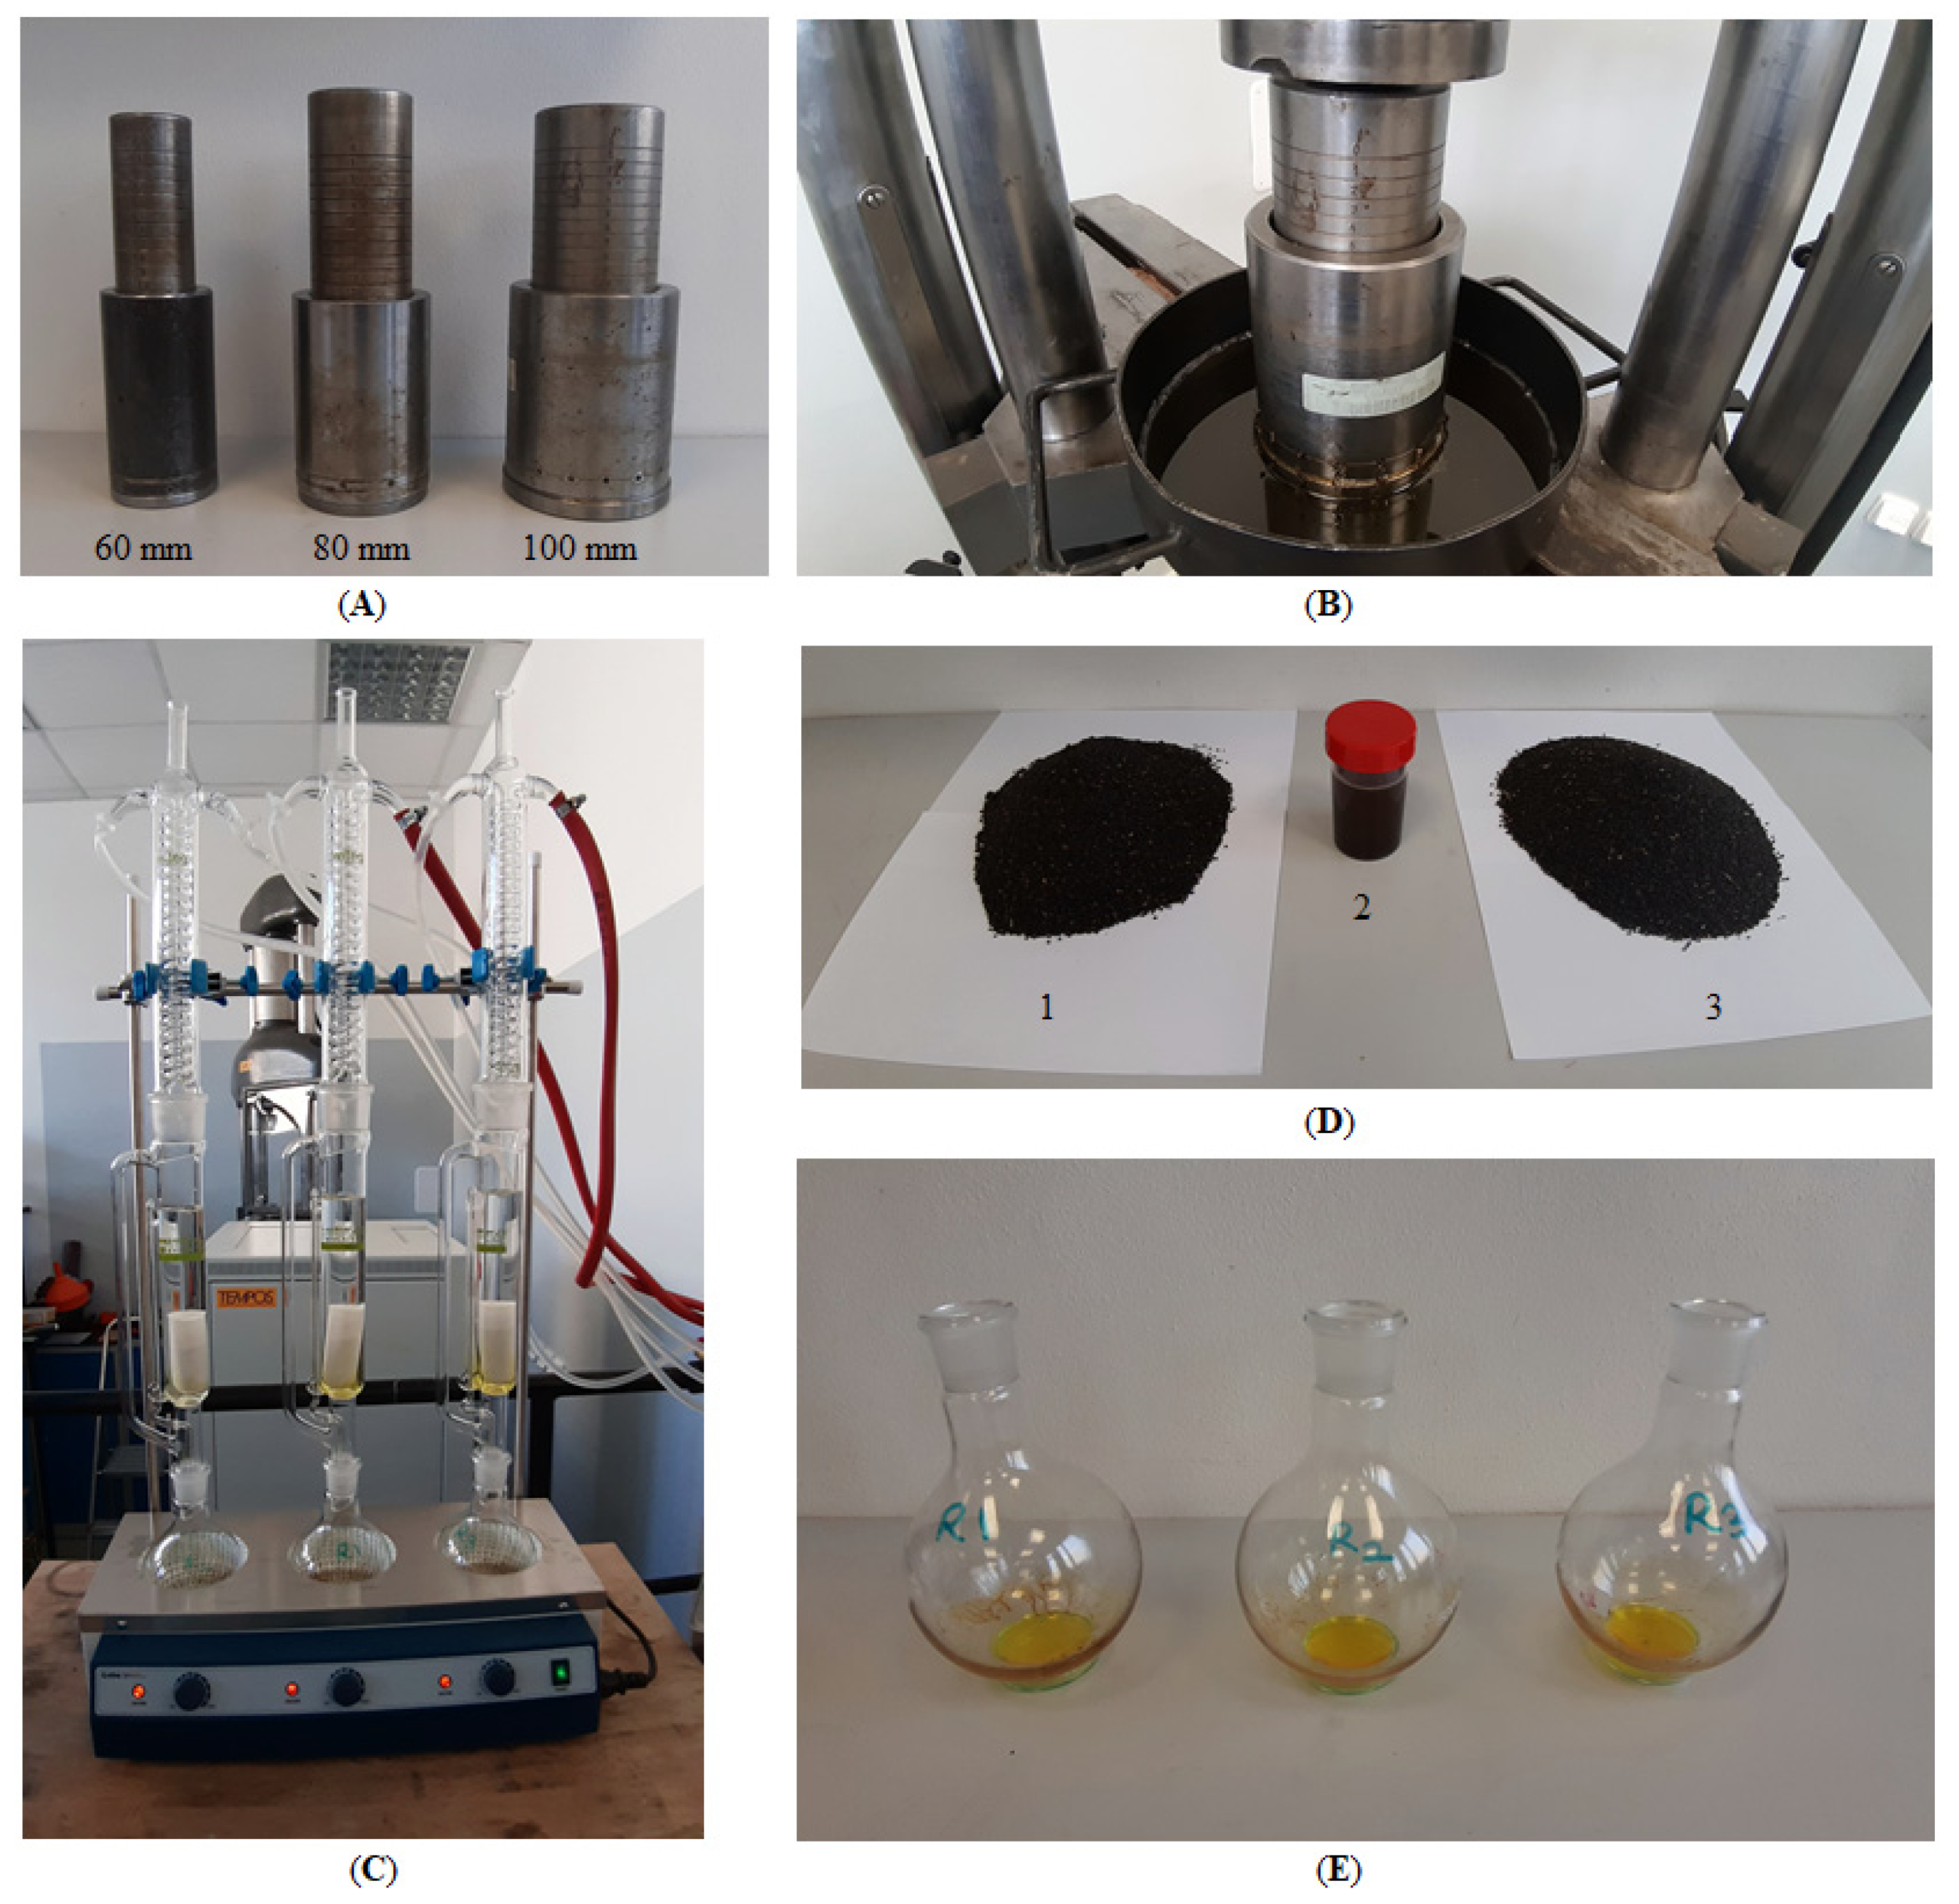 Processes | Free Full-Text | Optimizing Uniaxial Oil Extraction of Bulk  Rapeseeds: Spectrophotometric and Chemical Analyses of the Extracted Oil  under Pretreatment Temperatures and Heating Intervals